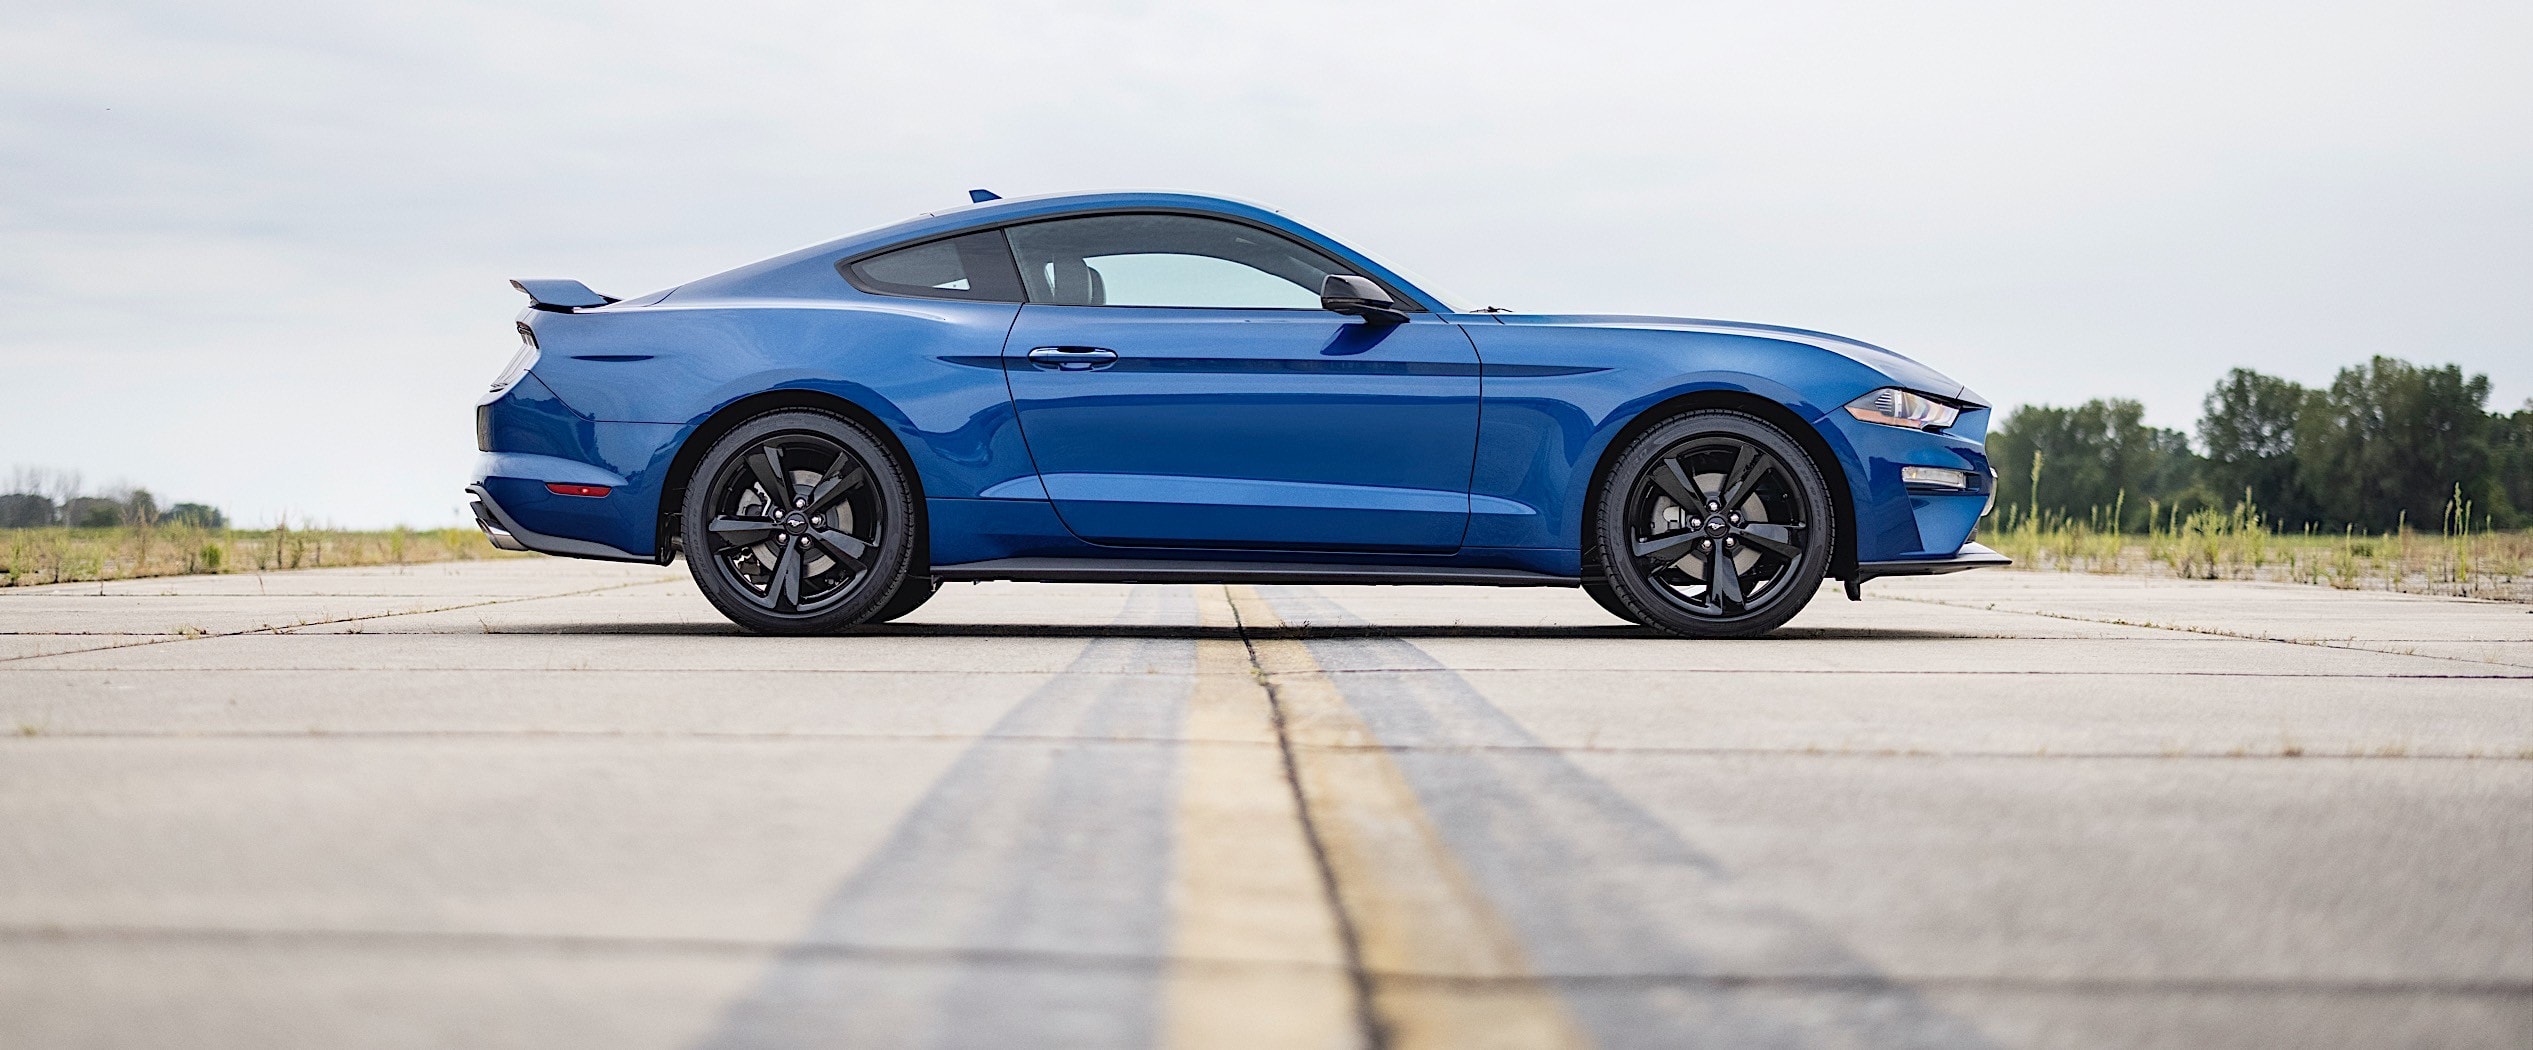 2023 Ford Mustang Order Books Will Open This Fall - autoevolution